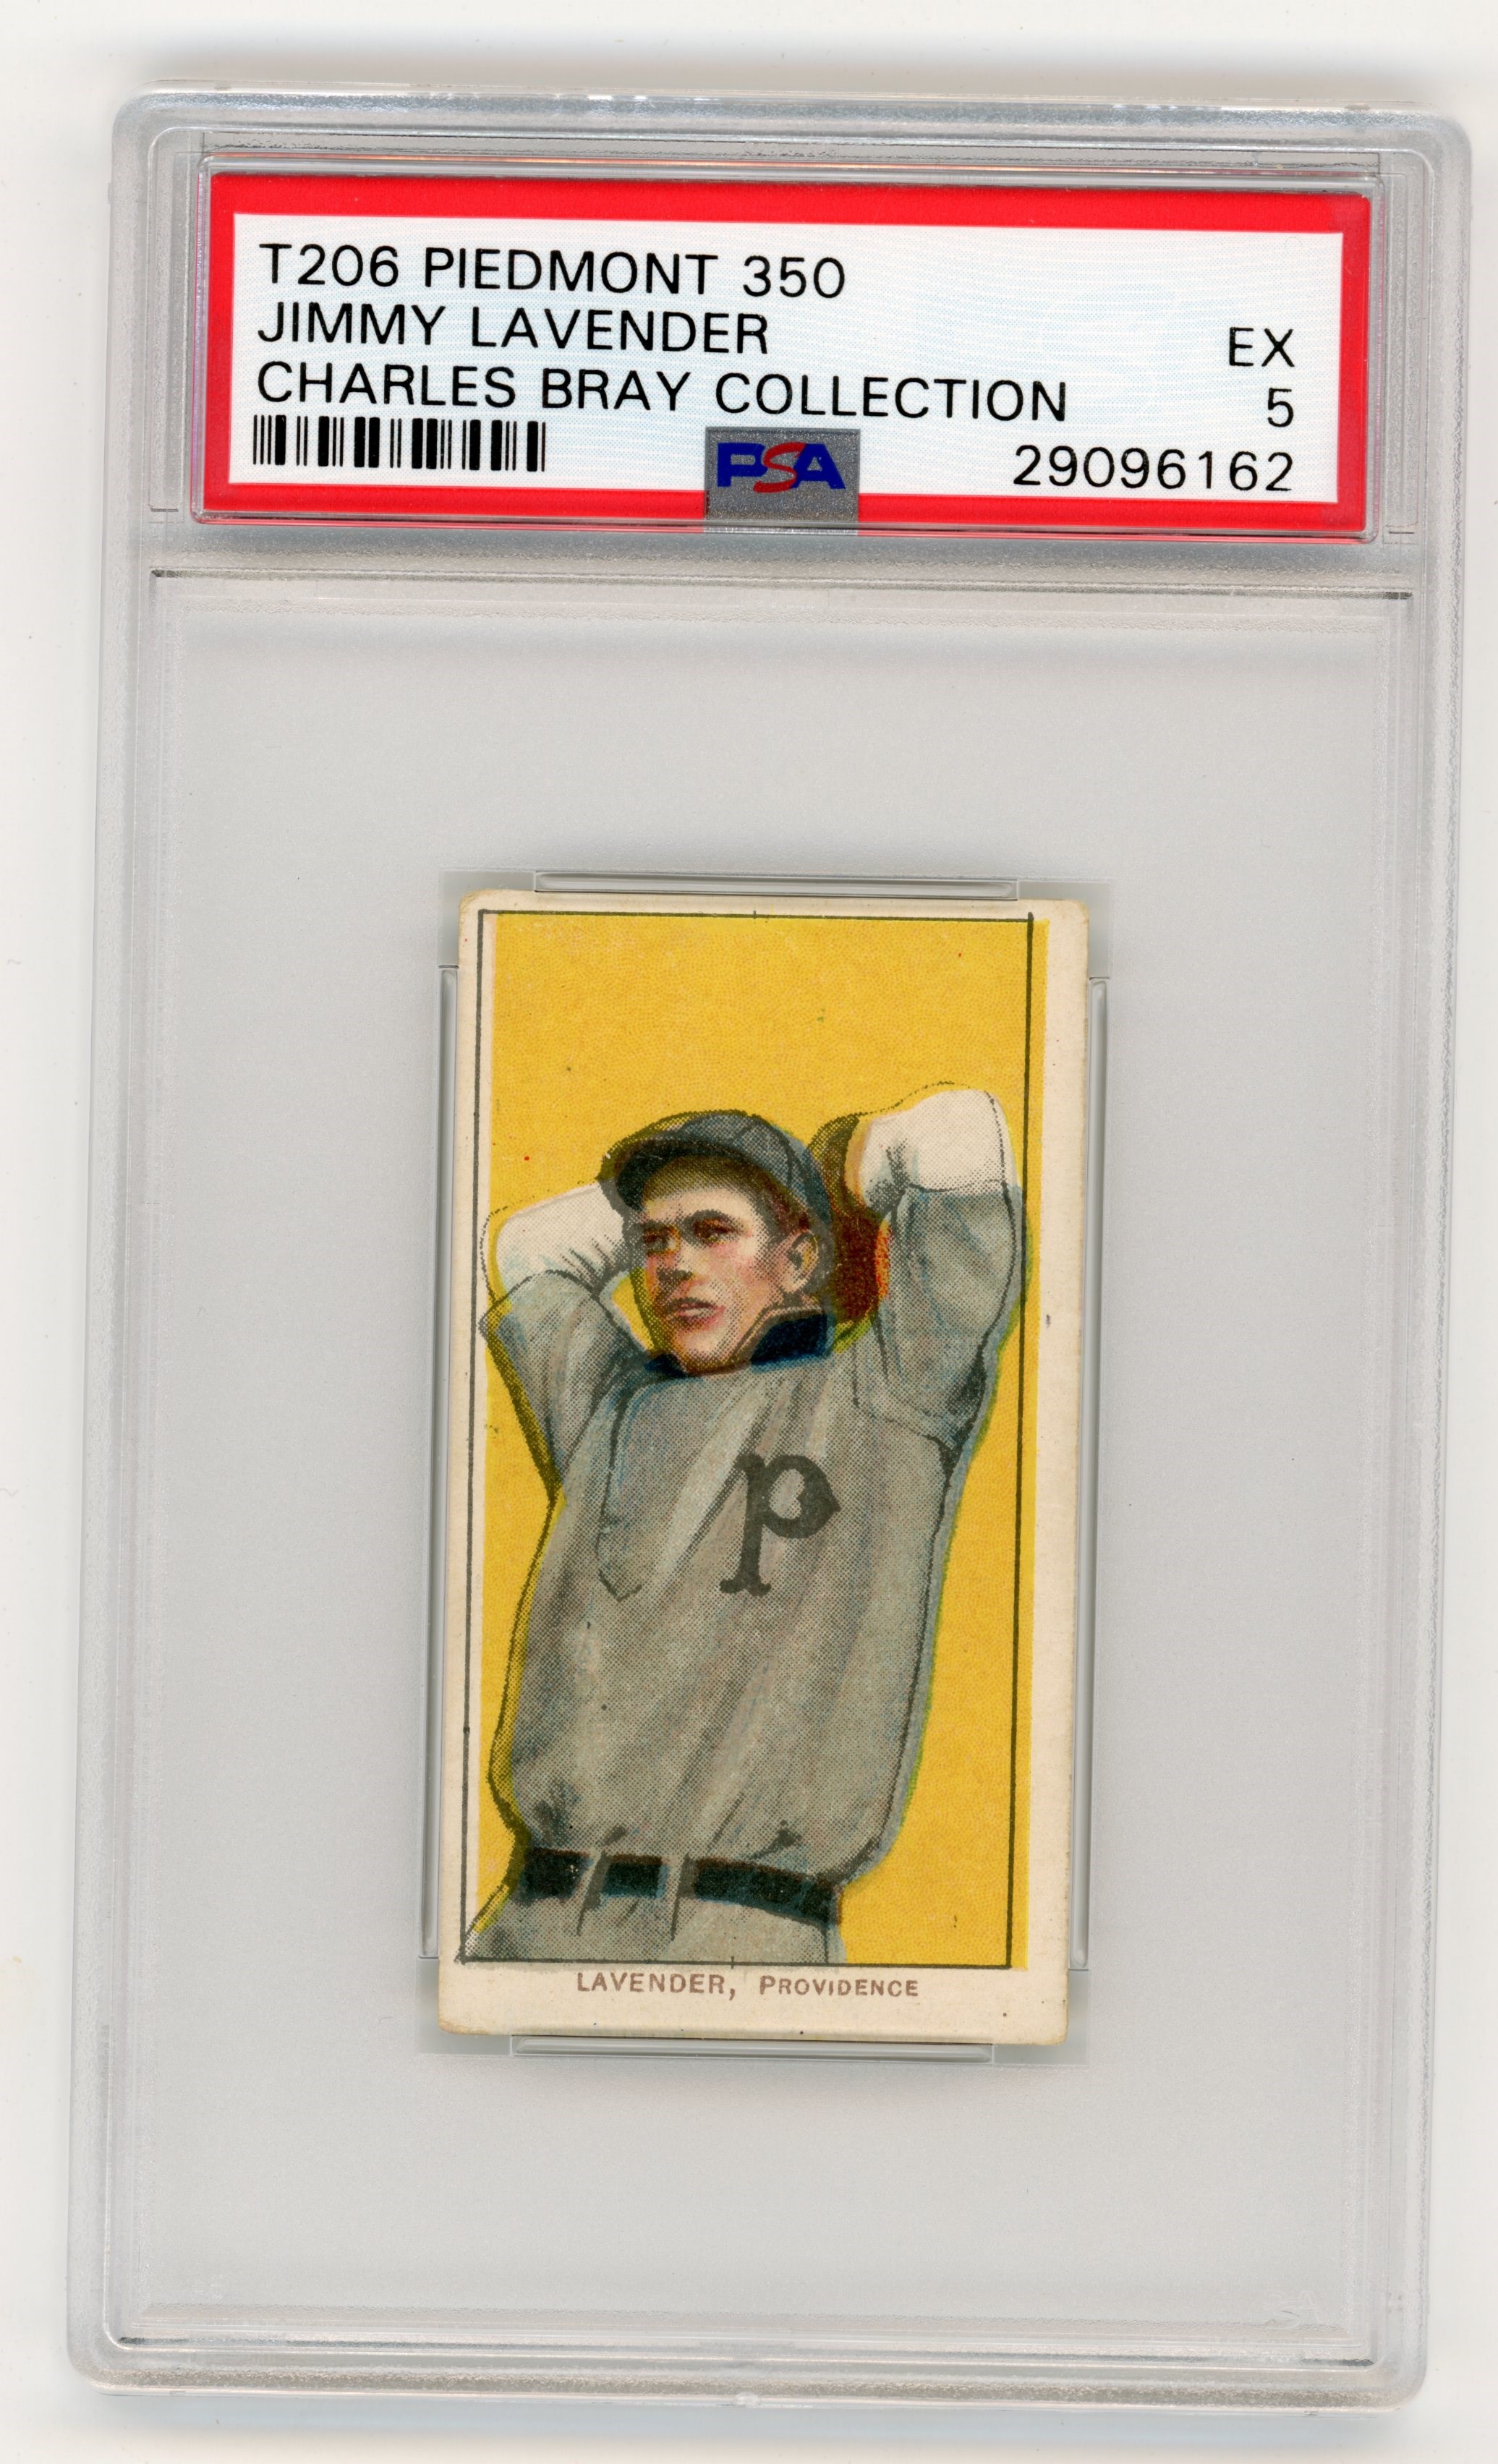 - T206 Piedmont 350 Jimmy Lavender PSA EX 5 From the Charles Bray Collection.